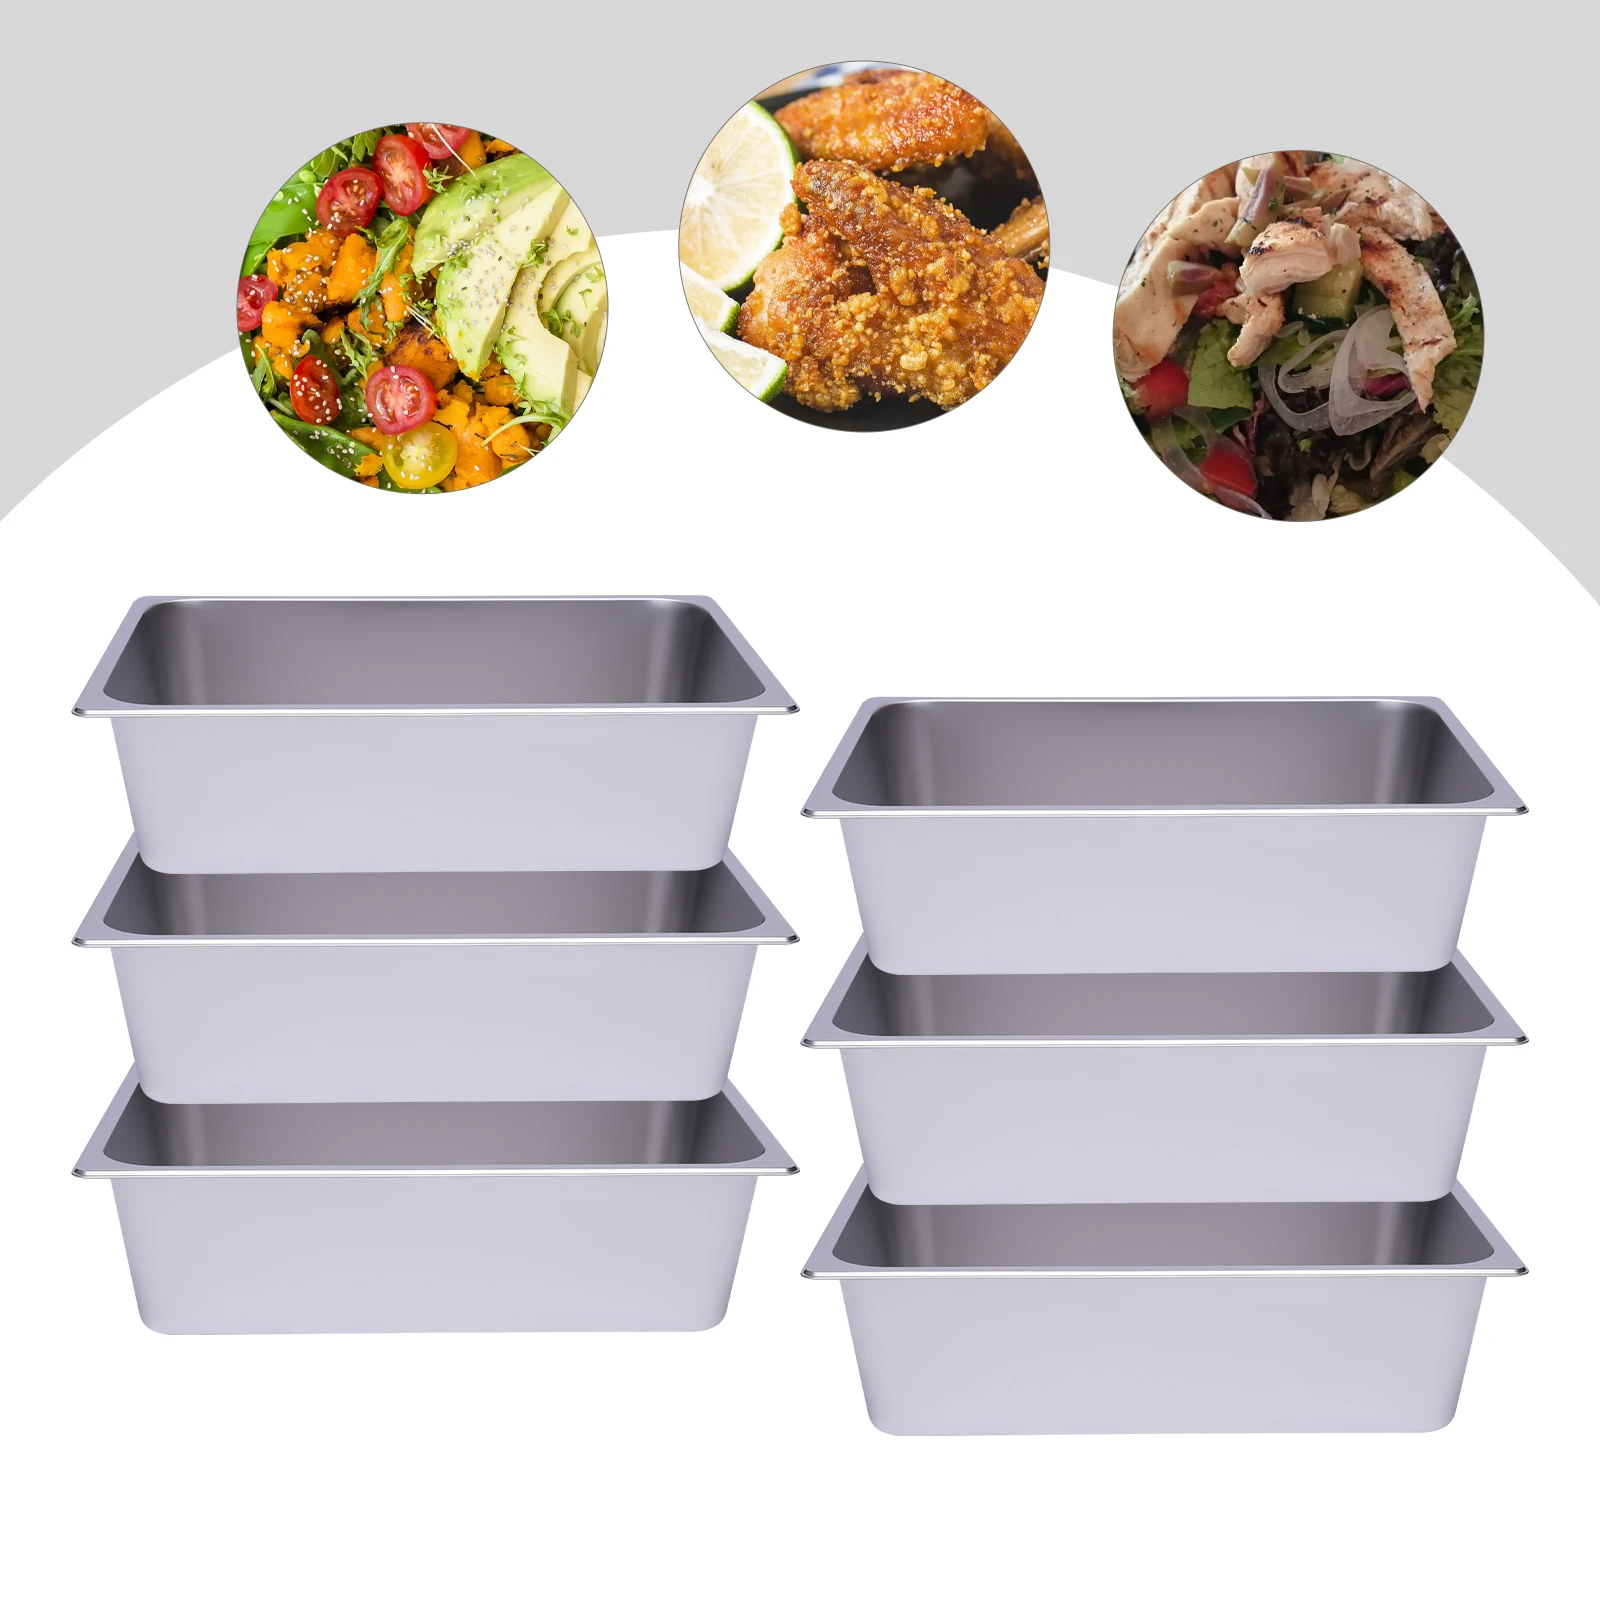 

6 Packs 20.87*12.99*6In Large-Capacity Steam Table Pans, Stainless Steel Pan Deeper Height (6") High & Low-Temperature Resistant